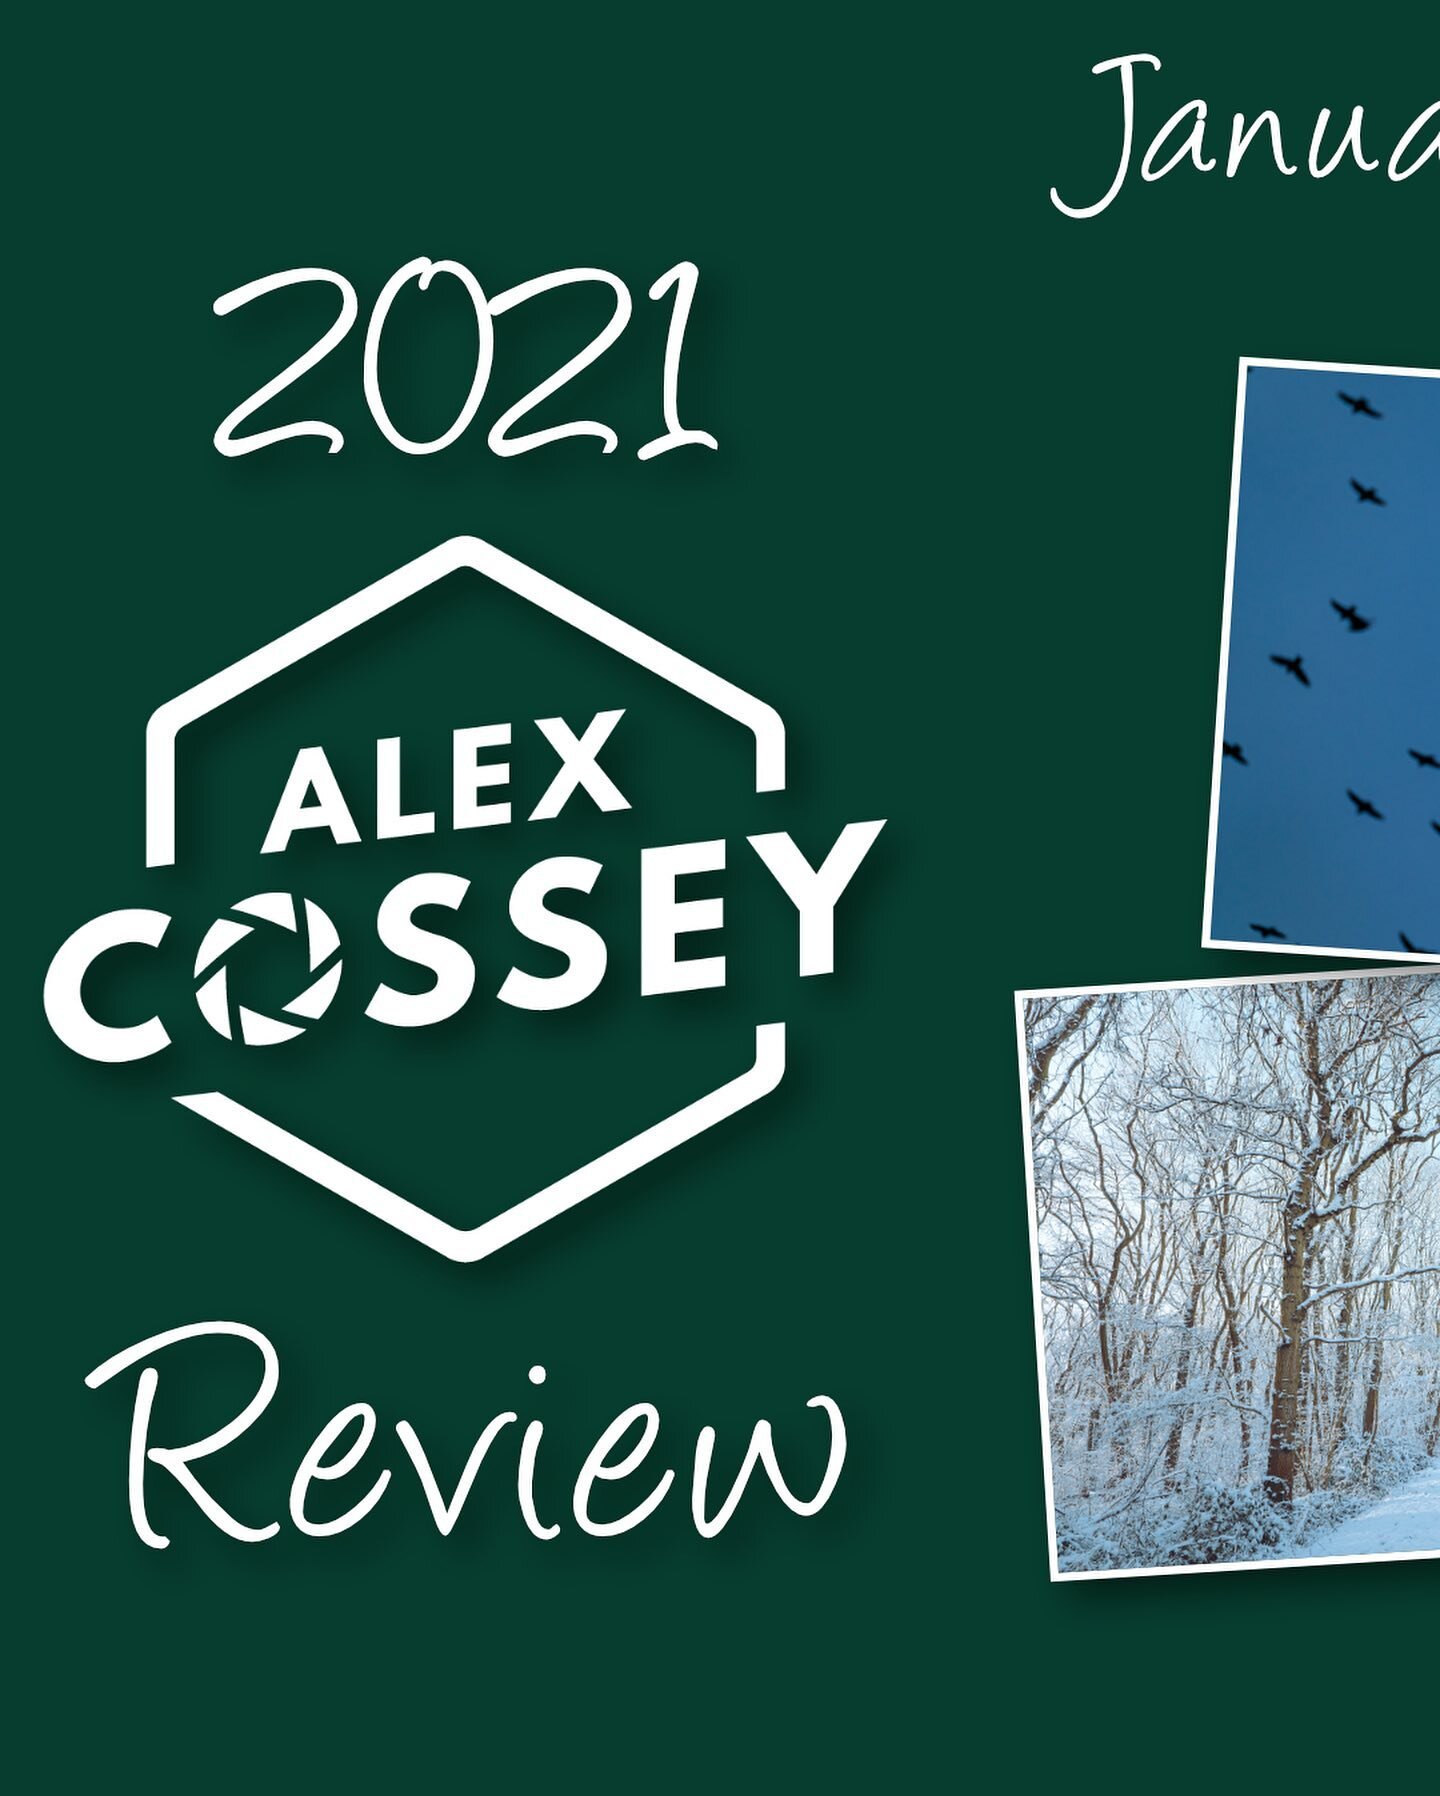 A cancellation yesterday gave me the time to finally finish my 2021 review blog. Despite a rough start, it turned out to be a great year for me, filled with fun experiences, important lessons and some much-needed time with family and friends.

I've b